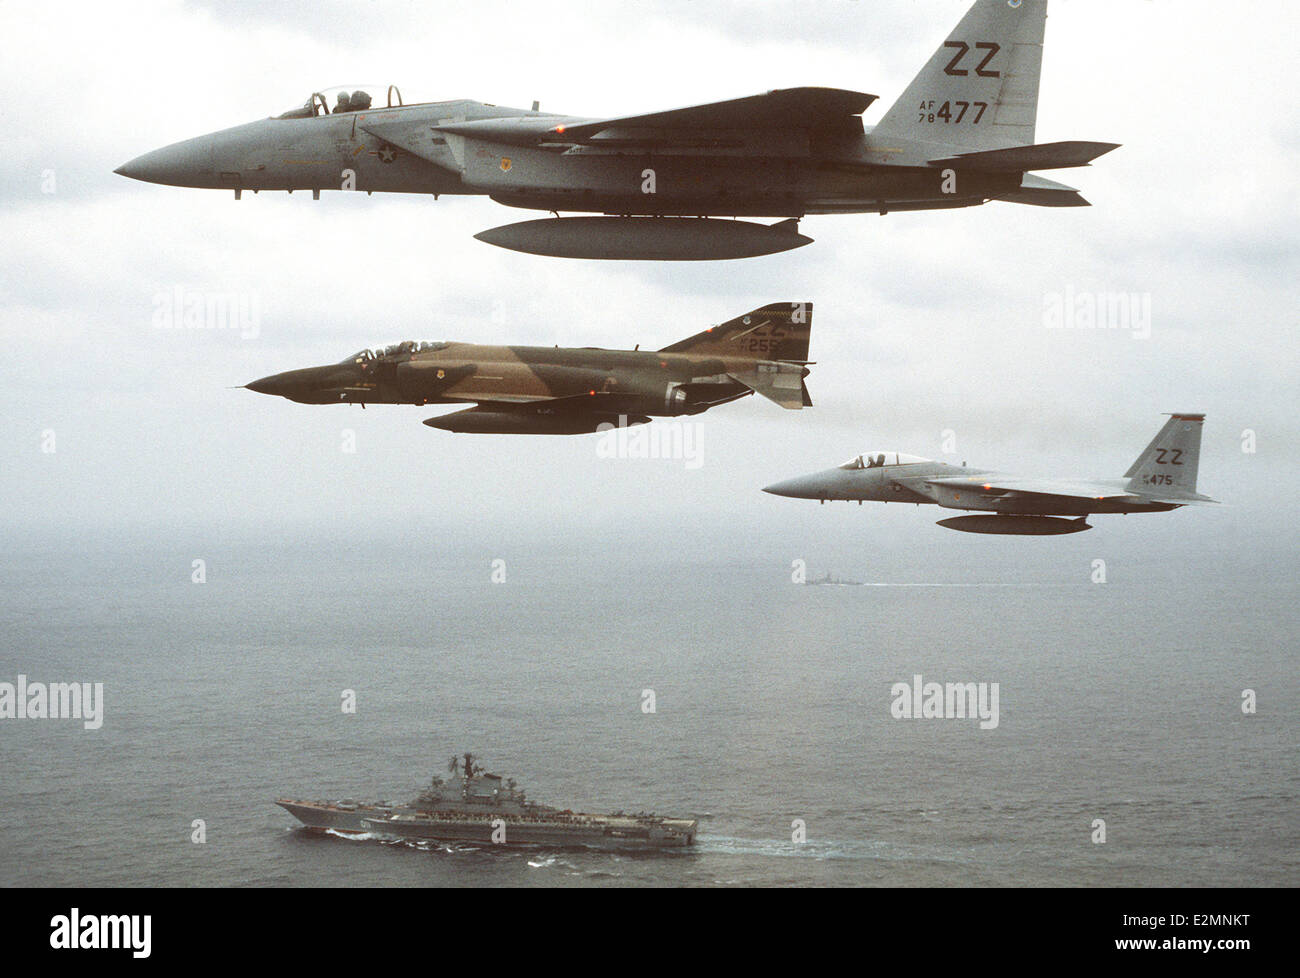 RF-4C Phantom II aircraft and two F-15 Eagle aircraft flying over the Soviet Kiev-class aircraft carrier Minsk Stock Photo